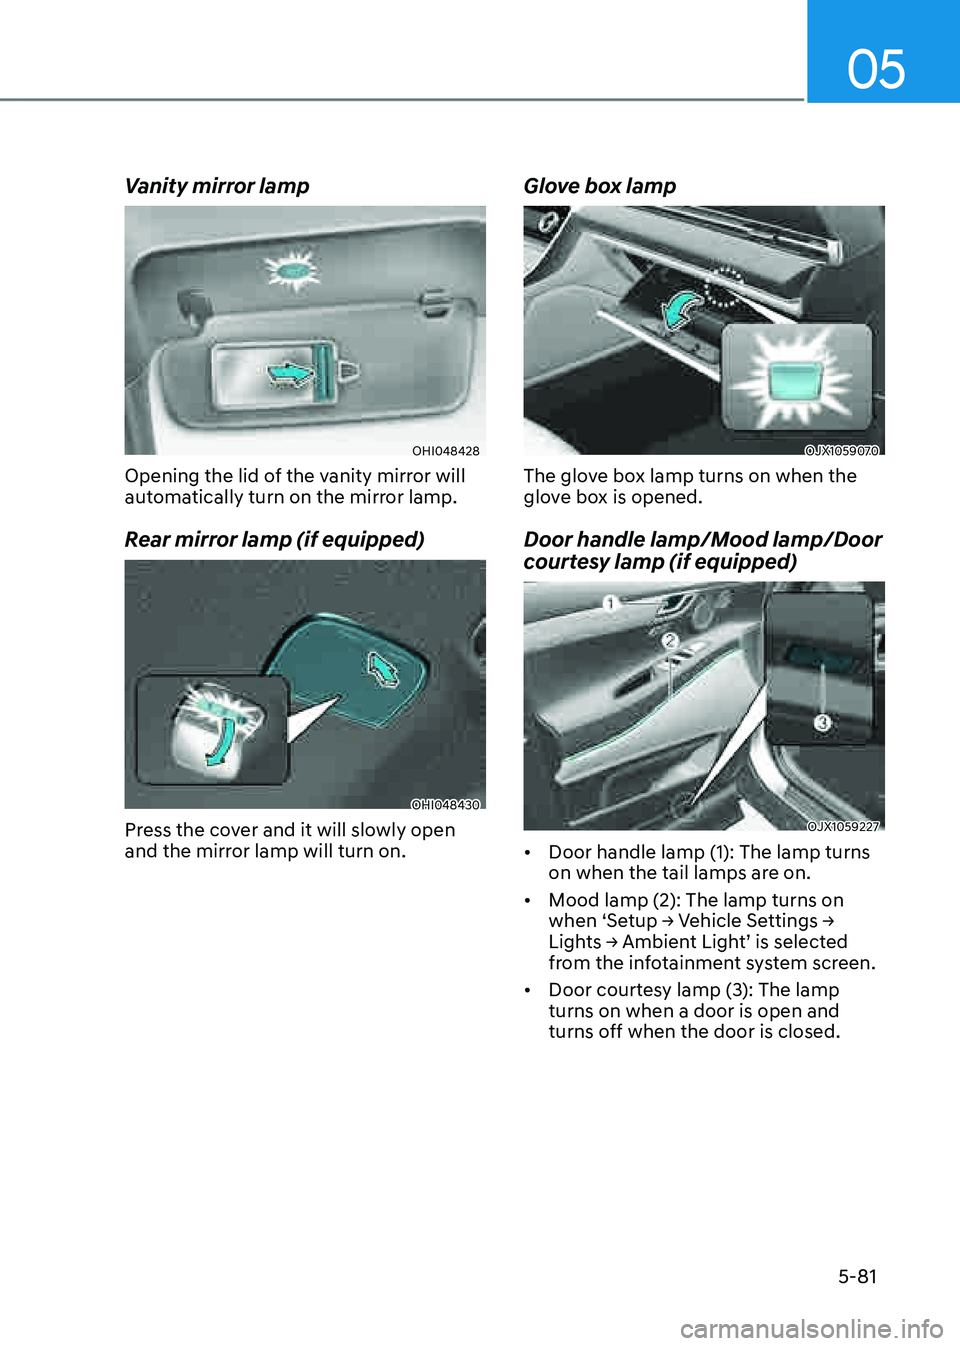 GENESIS GV80 2021  Owners Manual 05
5-81
Vanity mirror lamp
OHI048428OHI048428
Opening the lid of the vanity mirror will 
automatically turn on the mirror lamp.
Rear mirror lamp (if equipped)
OHI048430OHI048430
Press the cover and it